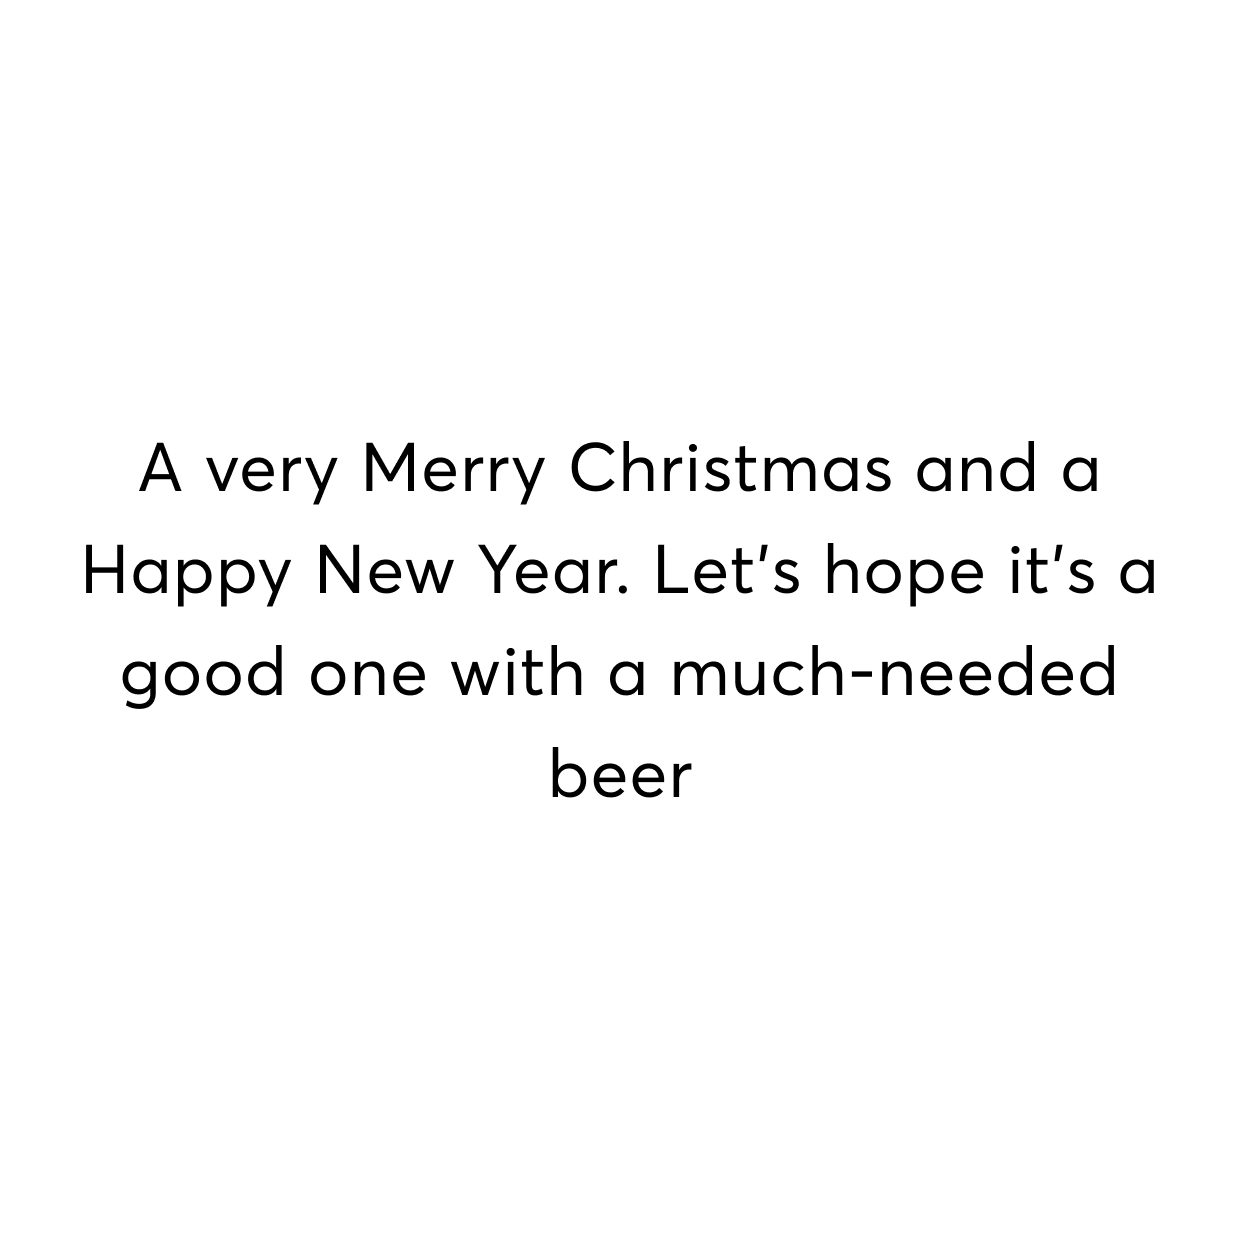 hope its a good one with a much needed beer